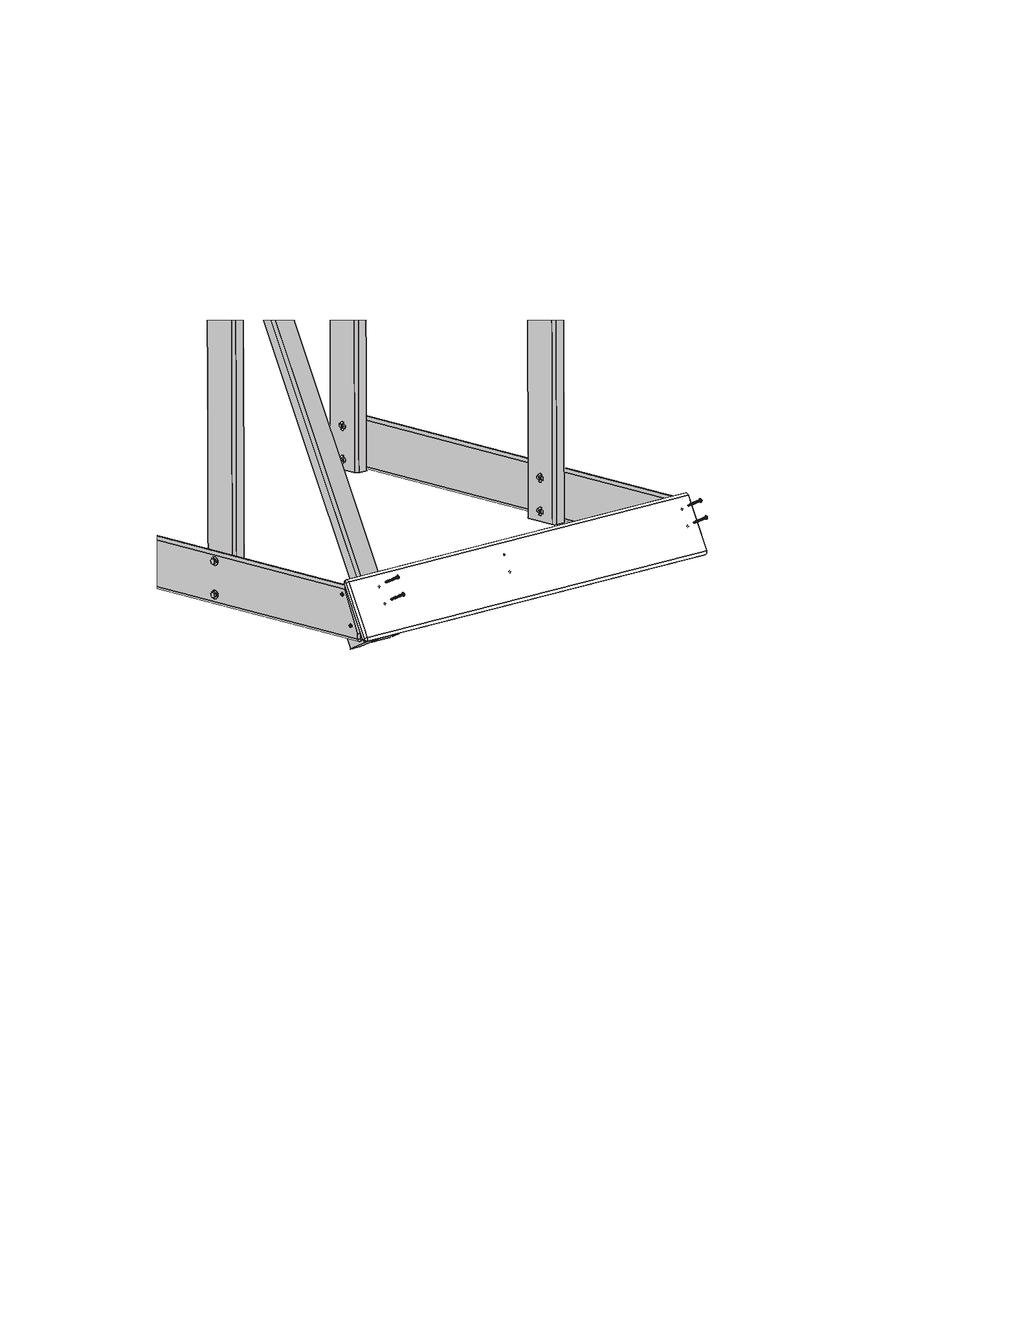 Step 10: Attach Lower Front A: Attach (1767) Lower Front flush to the top of (1766) Corner Block at (1769) Ground Side with 2 (S15) #8 x 1-3/4 Screws. (fig. 10.1 & 10.